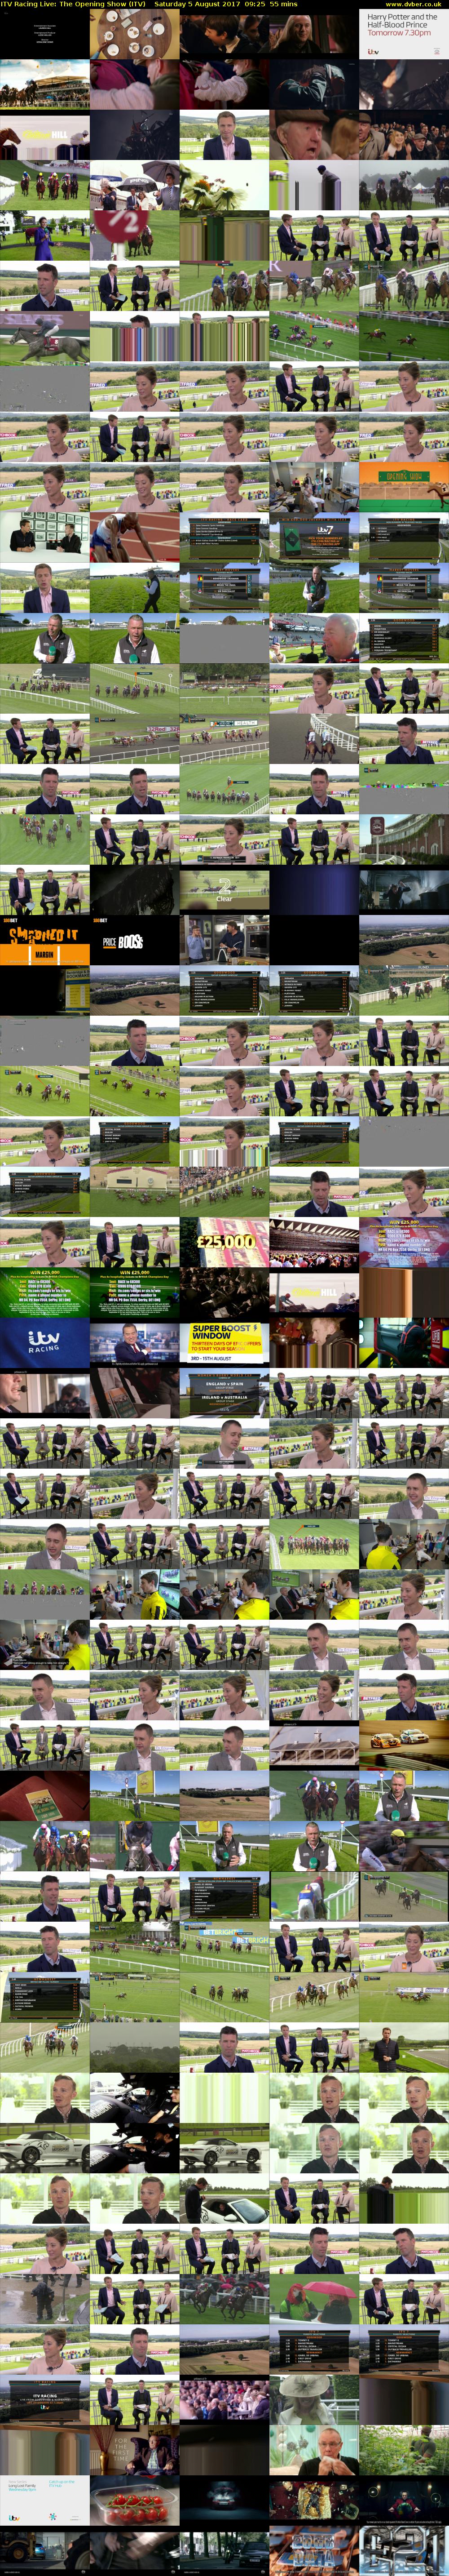 ITV Racing Live: The Opening Show (ITV) Saturday 5 August 2017 09:25 - 10:20